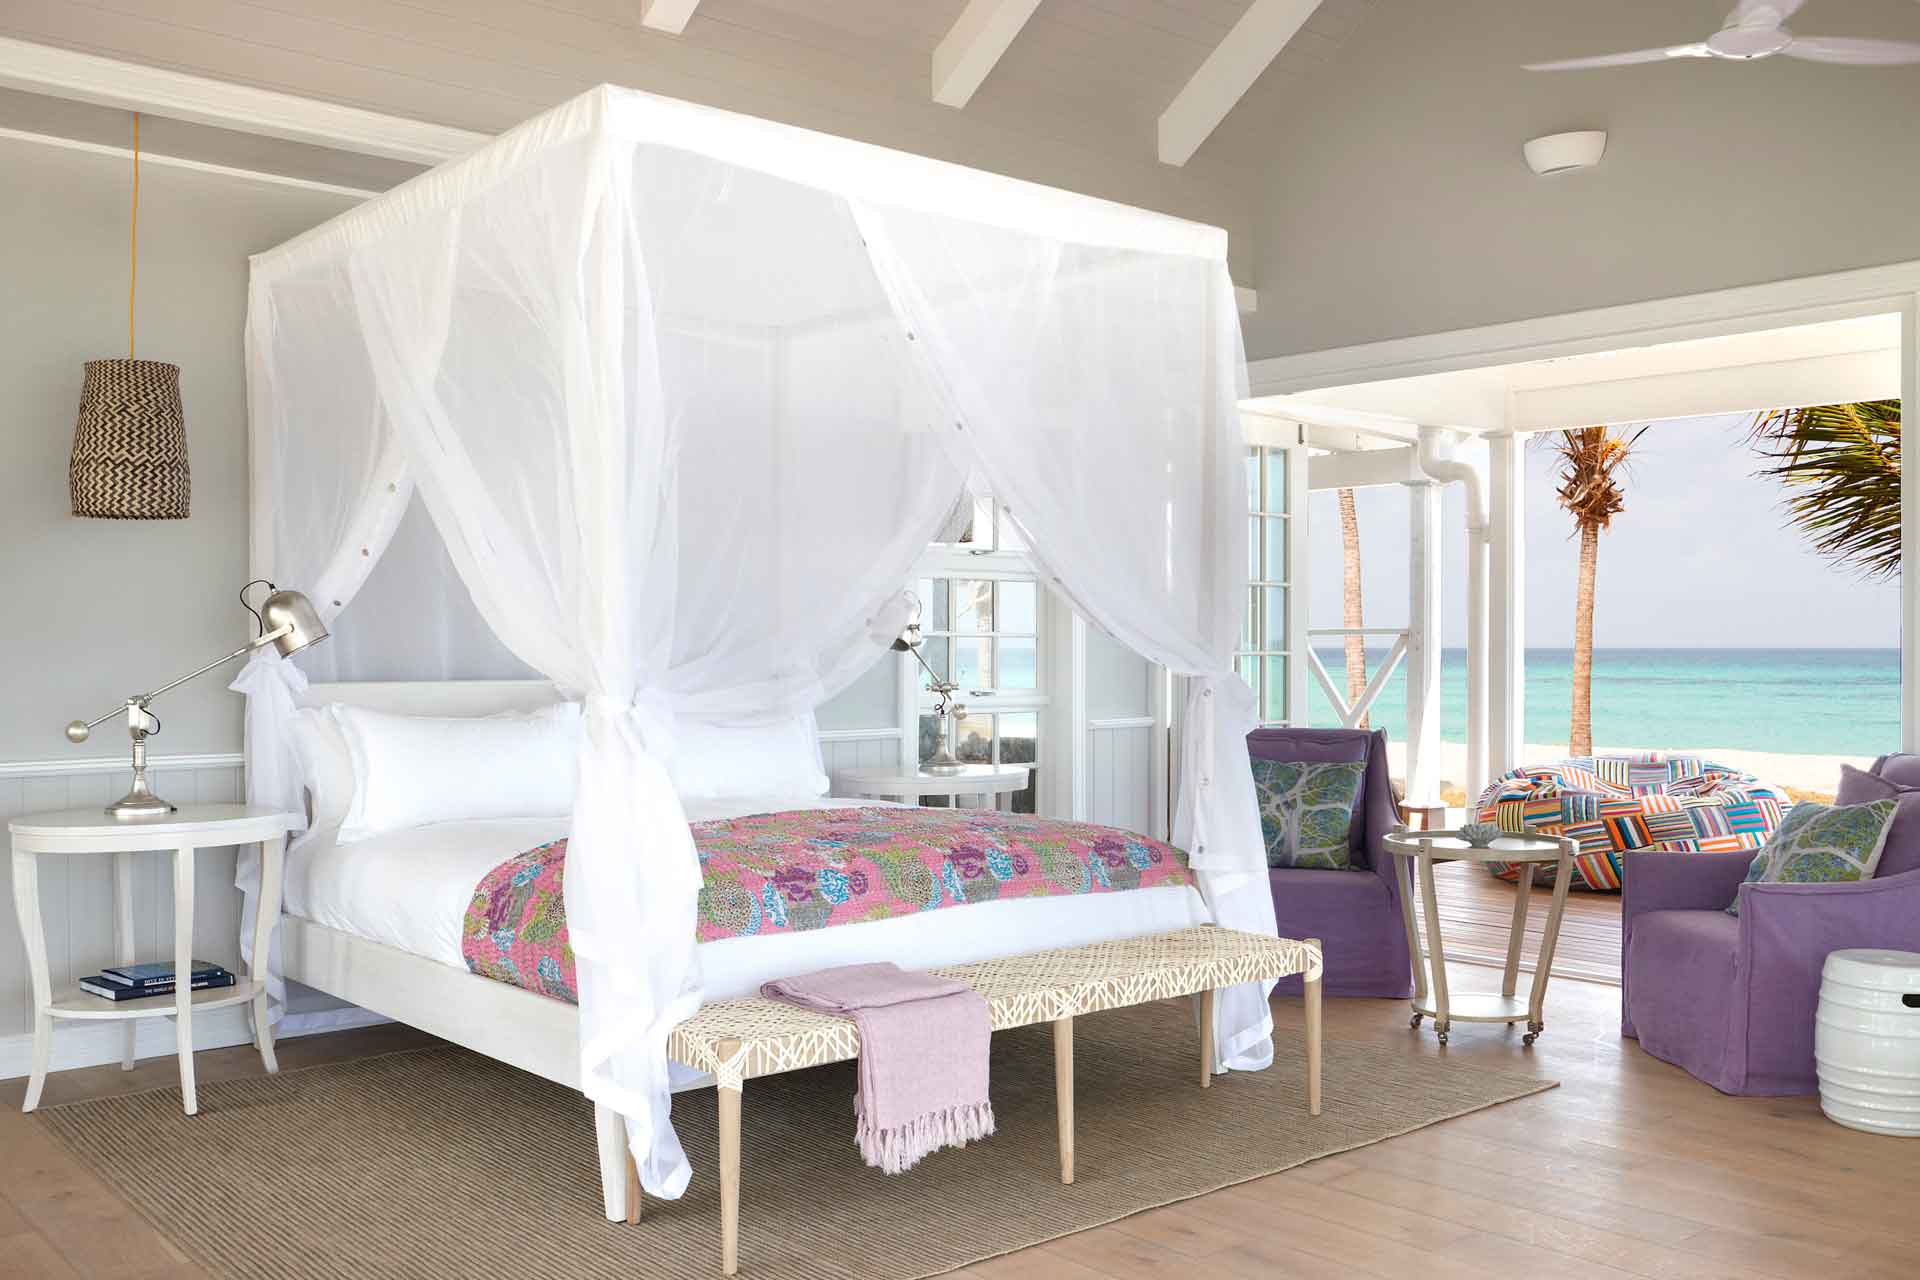 Hotel room with beach view and double bed with white canopy